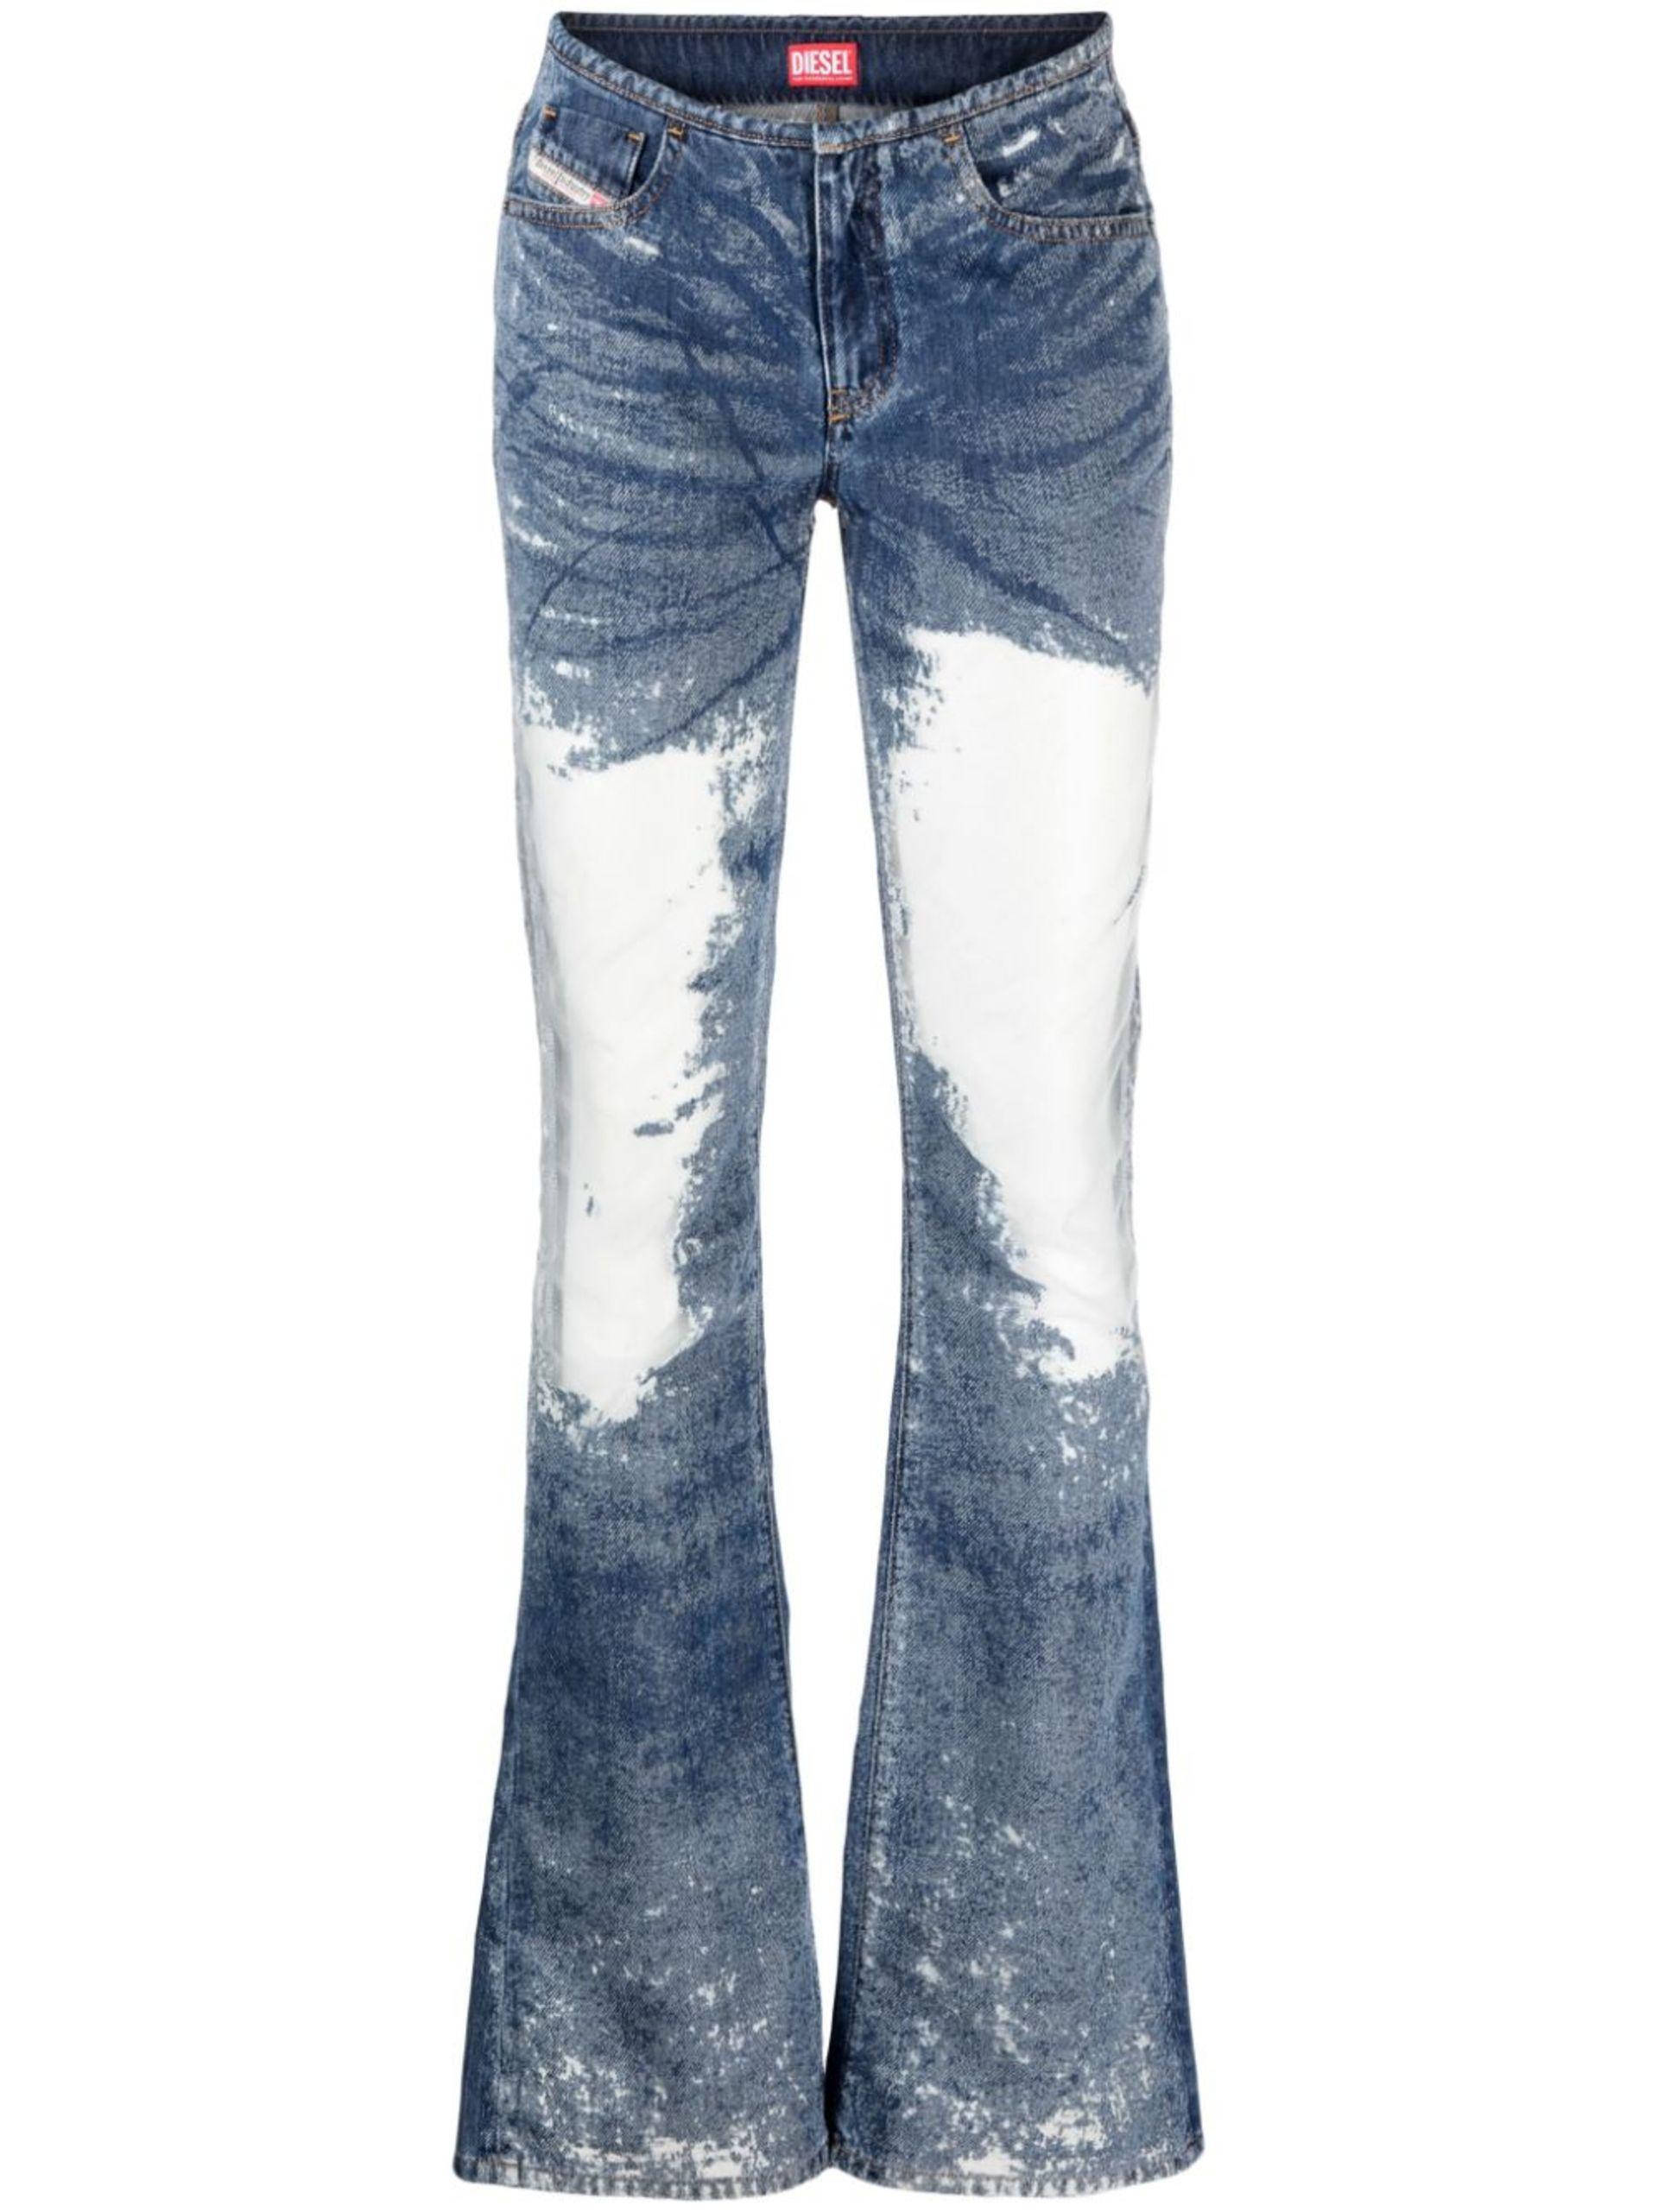 DIESEL D-shark 068jh Bootcut And Flare Jeans in Blue | Lyst